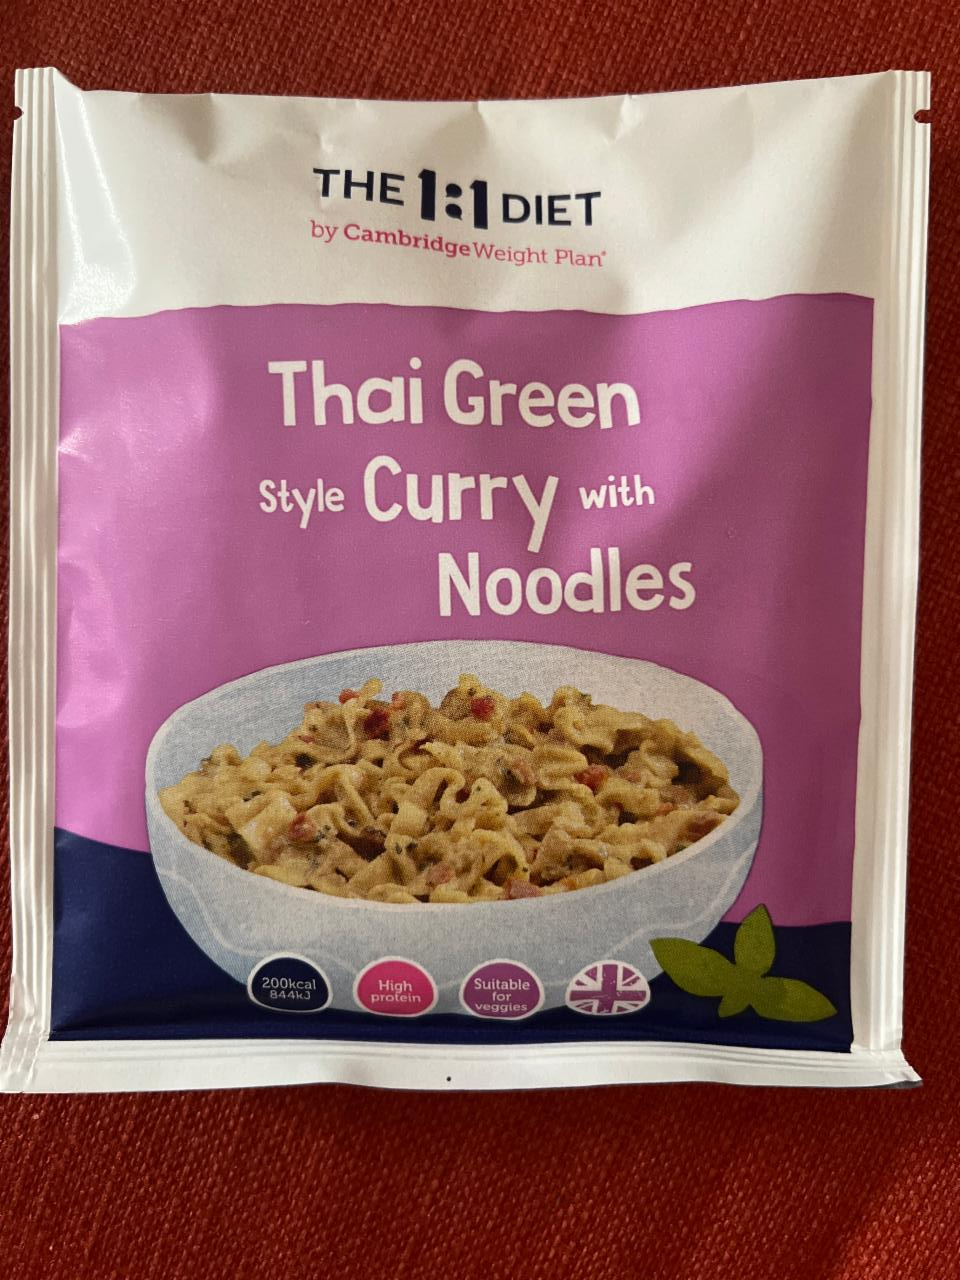 Fotografie - The 1:1 Diet Thai Green Style Curry w Noodles Cambridge Weight Plan